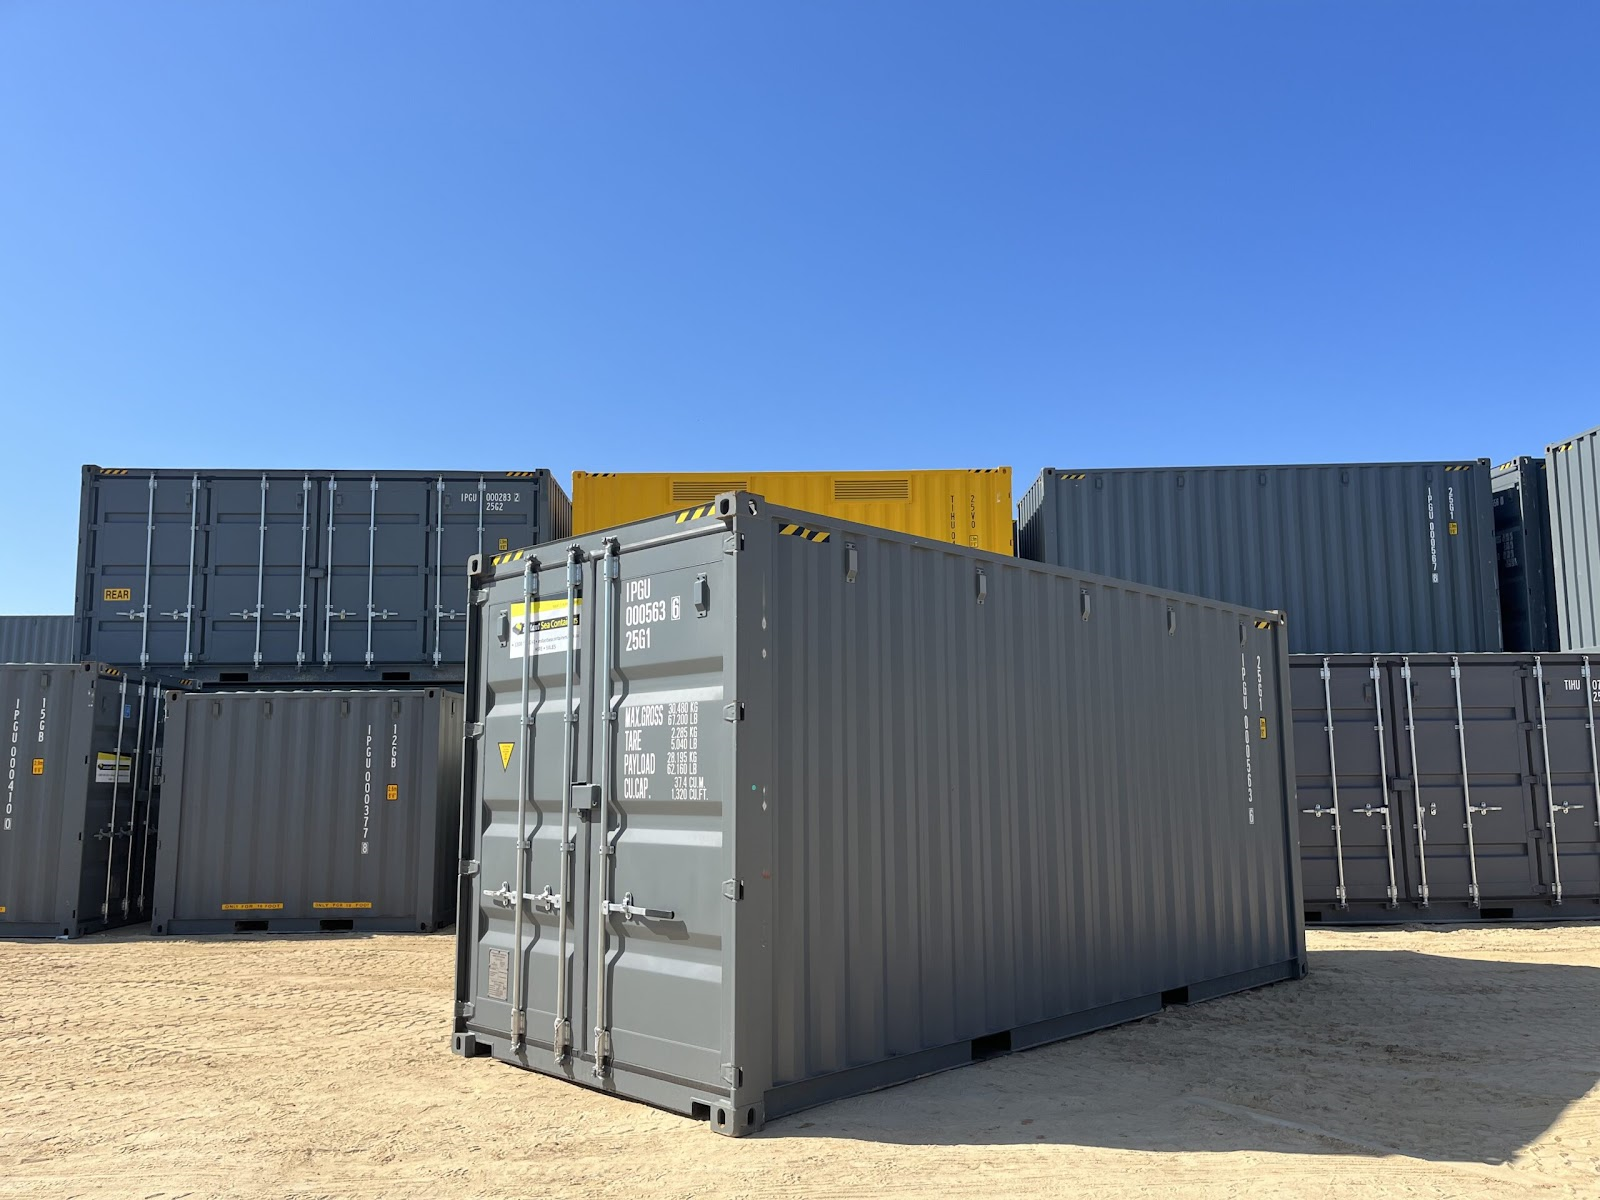 Stacked gray and yellow shipping containers in a storage yard under clear blue sky.